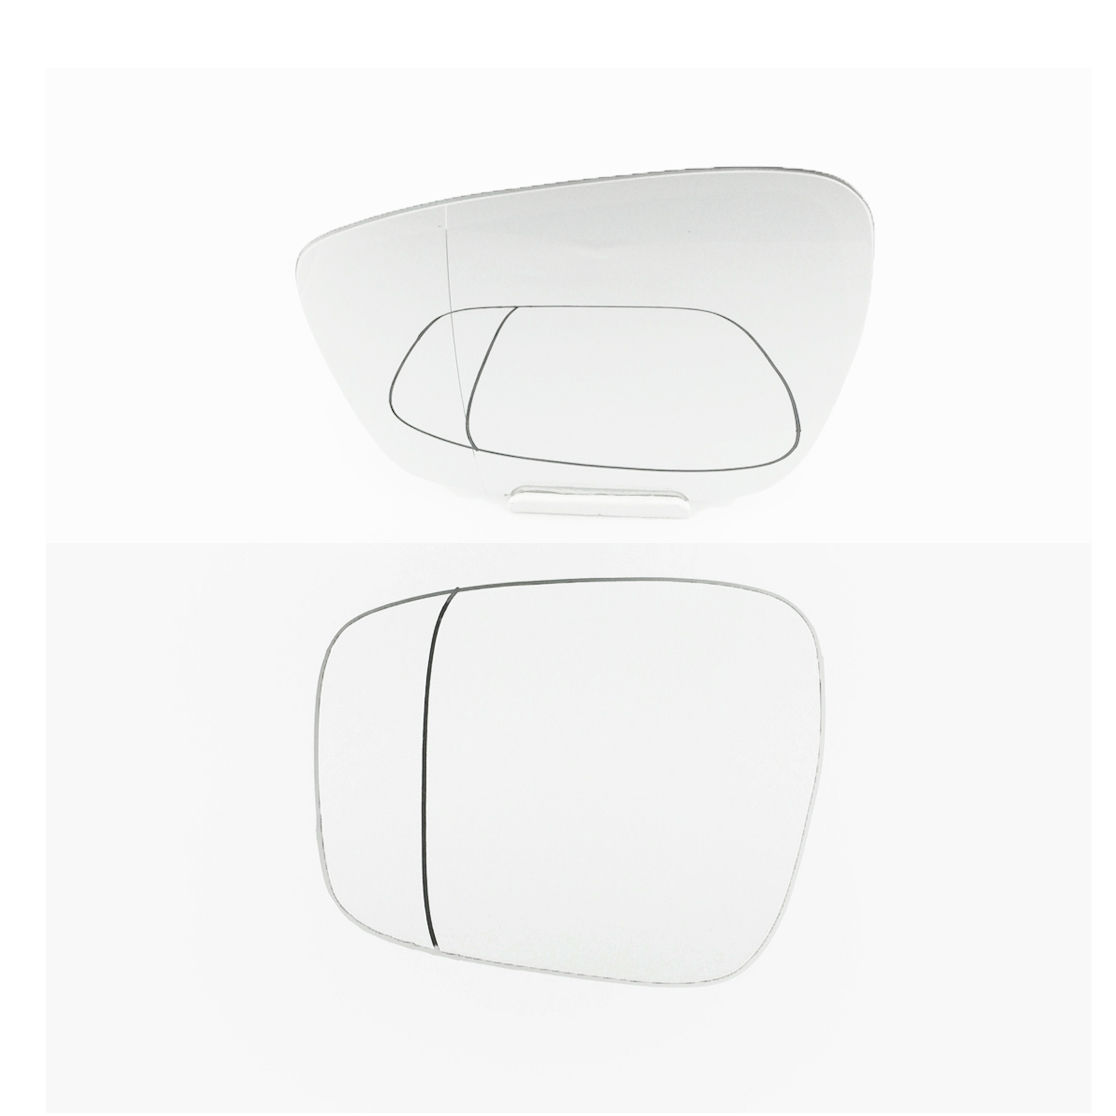 Peugeot 208 Wing Mirror Glass RIGHT HAND ( UK Driver Side ) 2012 to 2018 – Convex Wing Mirror